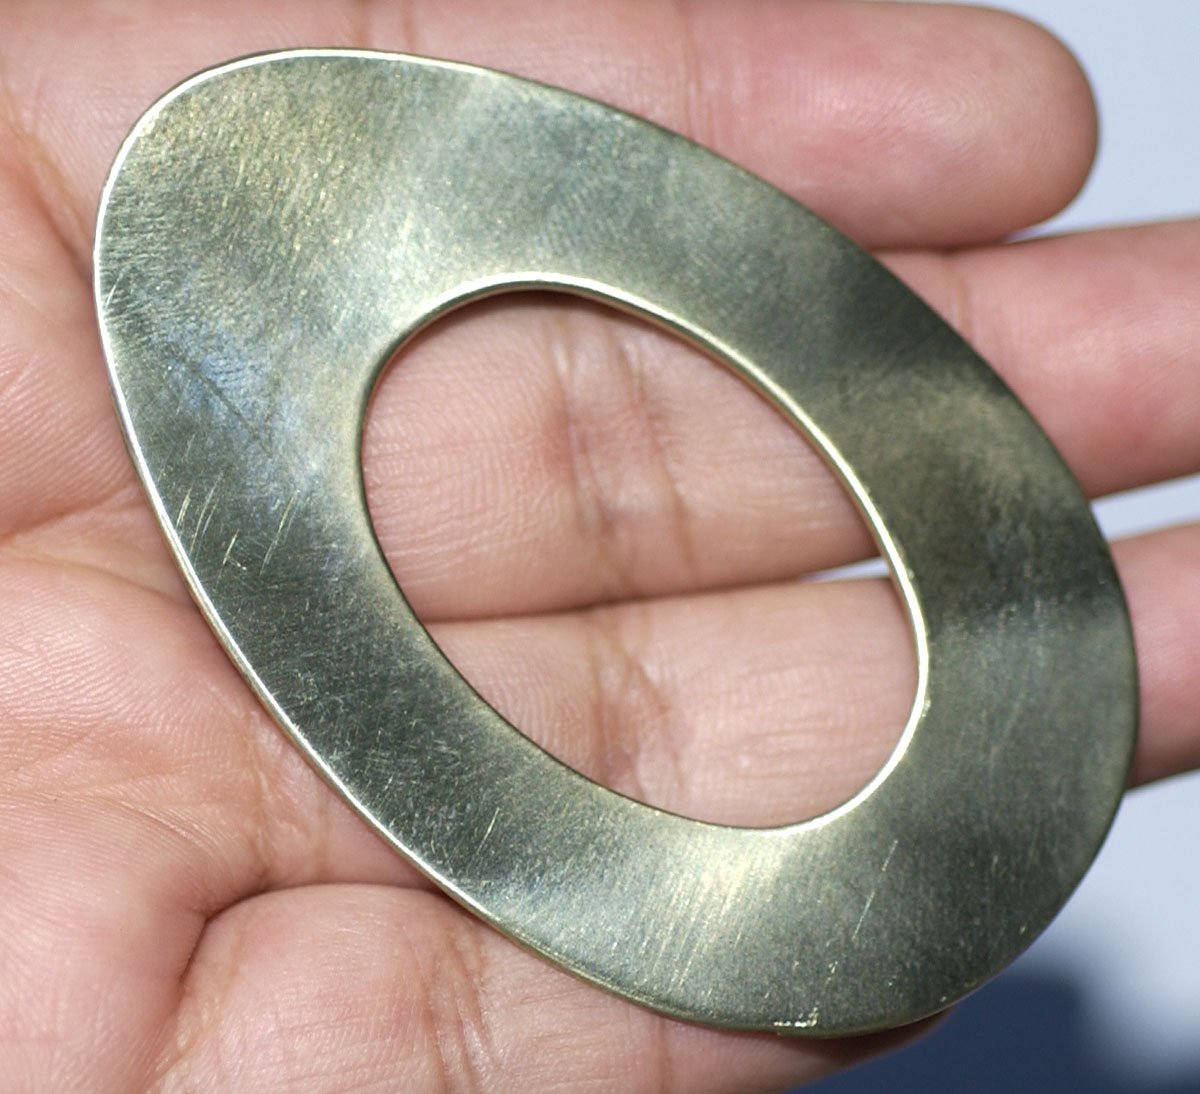 Donut Oval Blank 65mm x 41mm 24g Washer Polished Textured Blanks Shape, Variety of Metals,